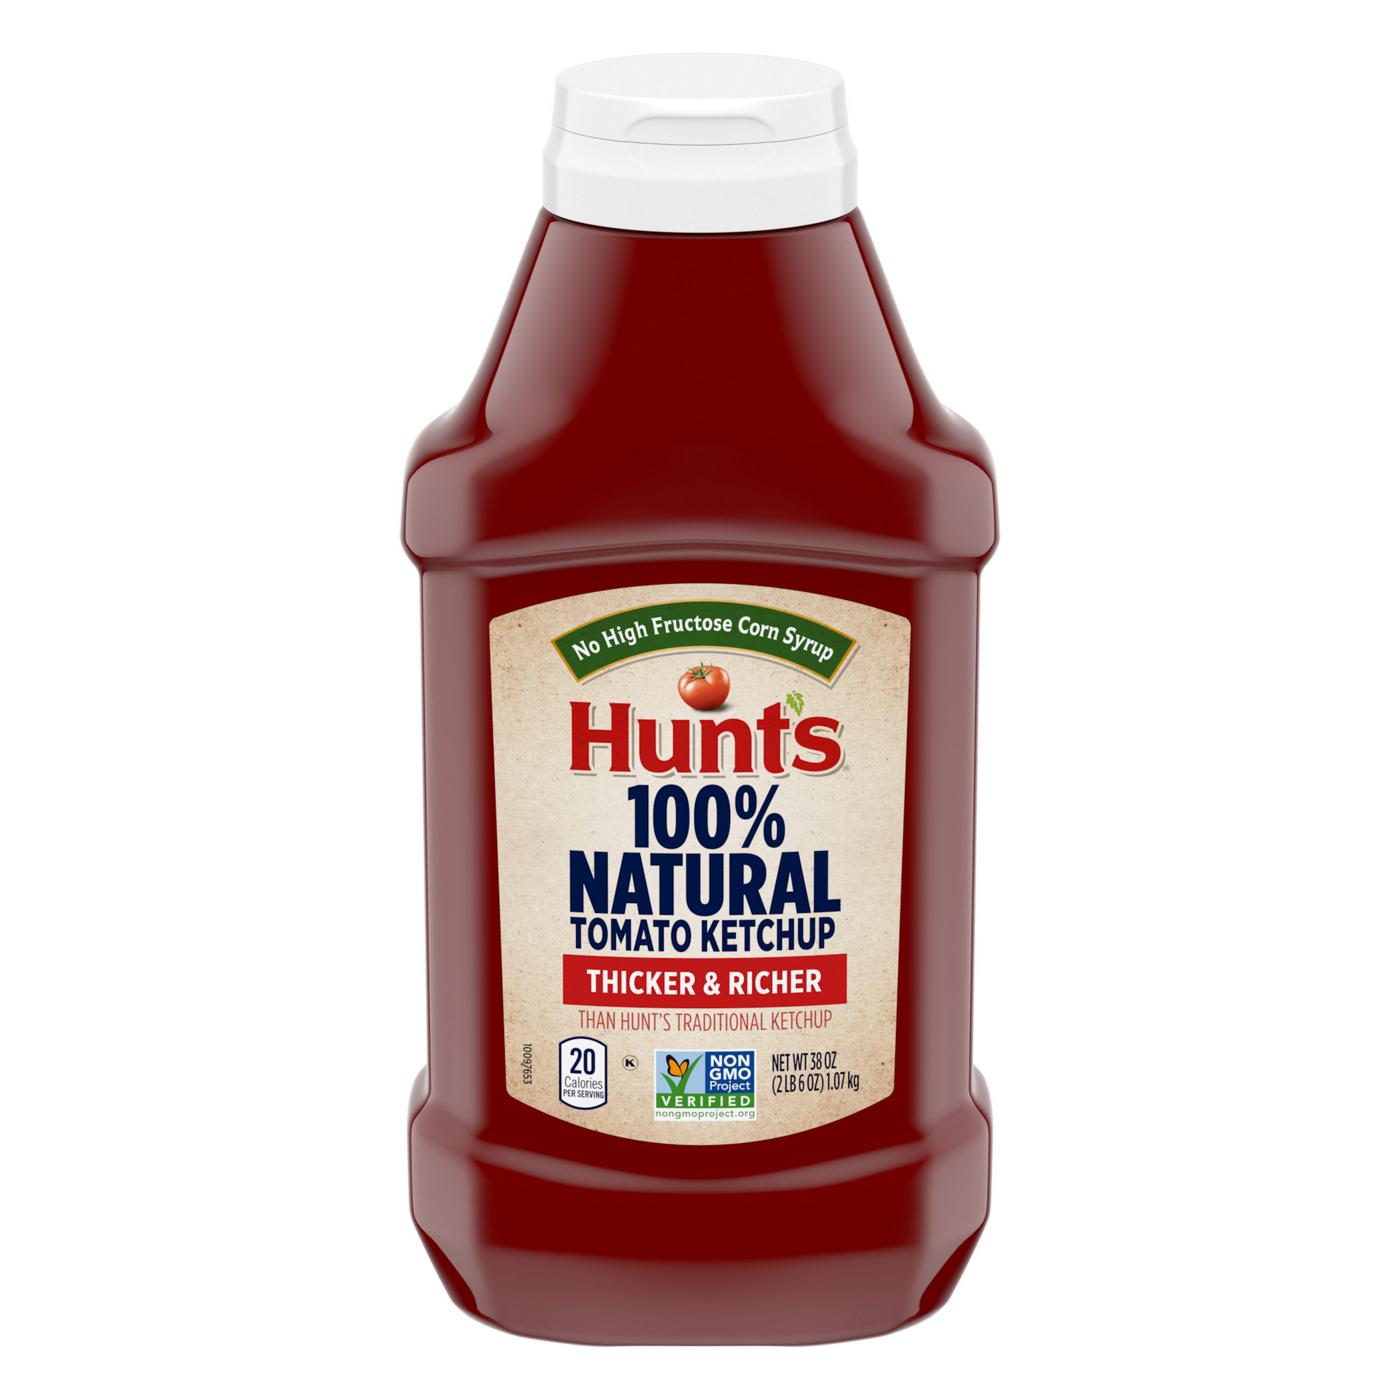 Hunt's Thicker & Richer Tomato Ketchup; image 1 of 7